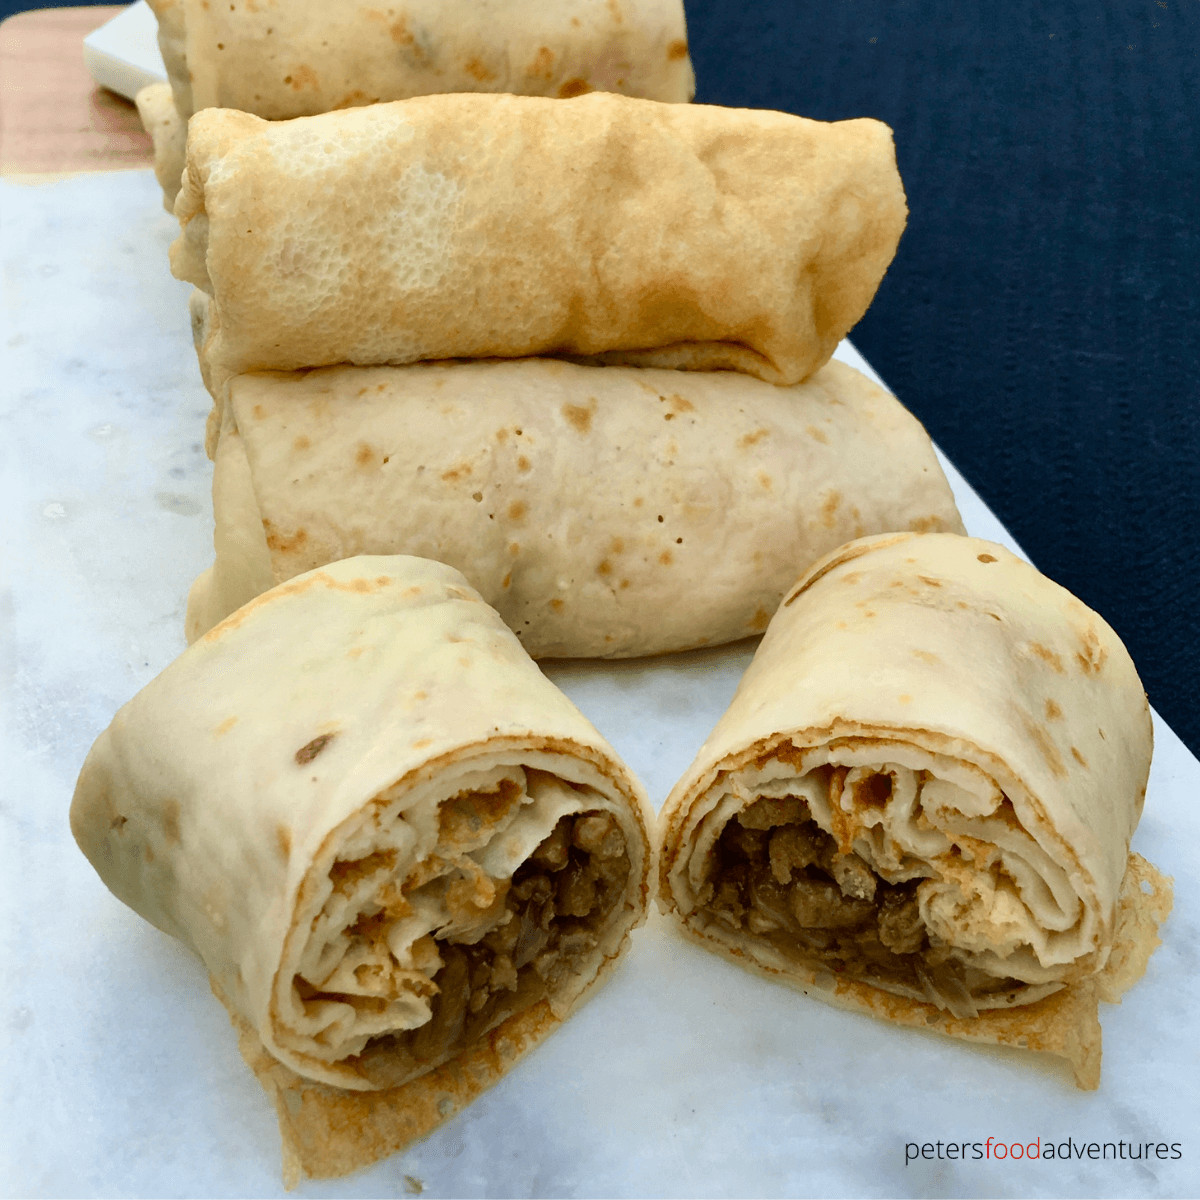 Russian Stuffed Blinchiki, also called Russian Crepes, are a thin rolled pancake stuffed full of savory meaty goodness. Not dry, fully of flavor and juicy. Meat Blini (Блинчики с мясом)